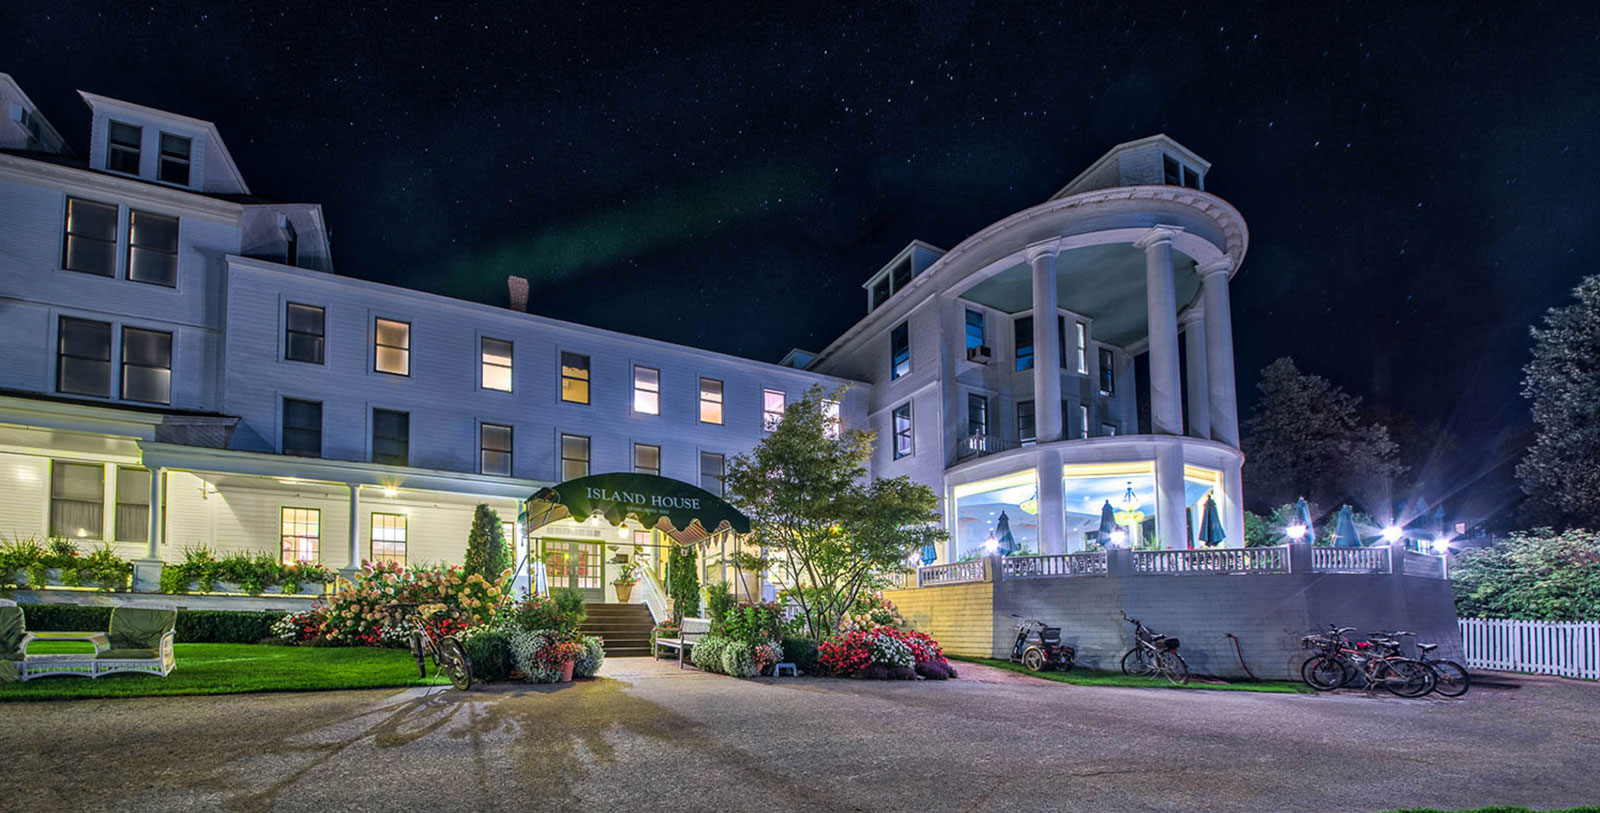 Image of Night Exterior, Island House Hotel in Mackinac Island, Michigan, 1852, Member of Historic Hotels of America, Hot Deals